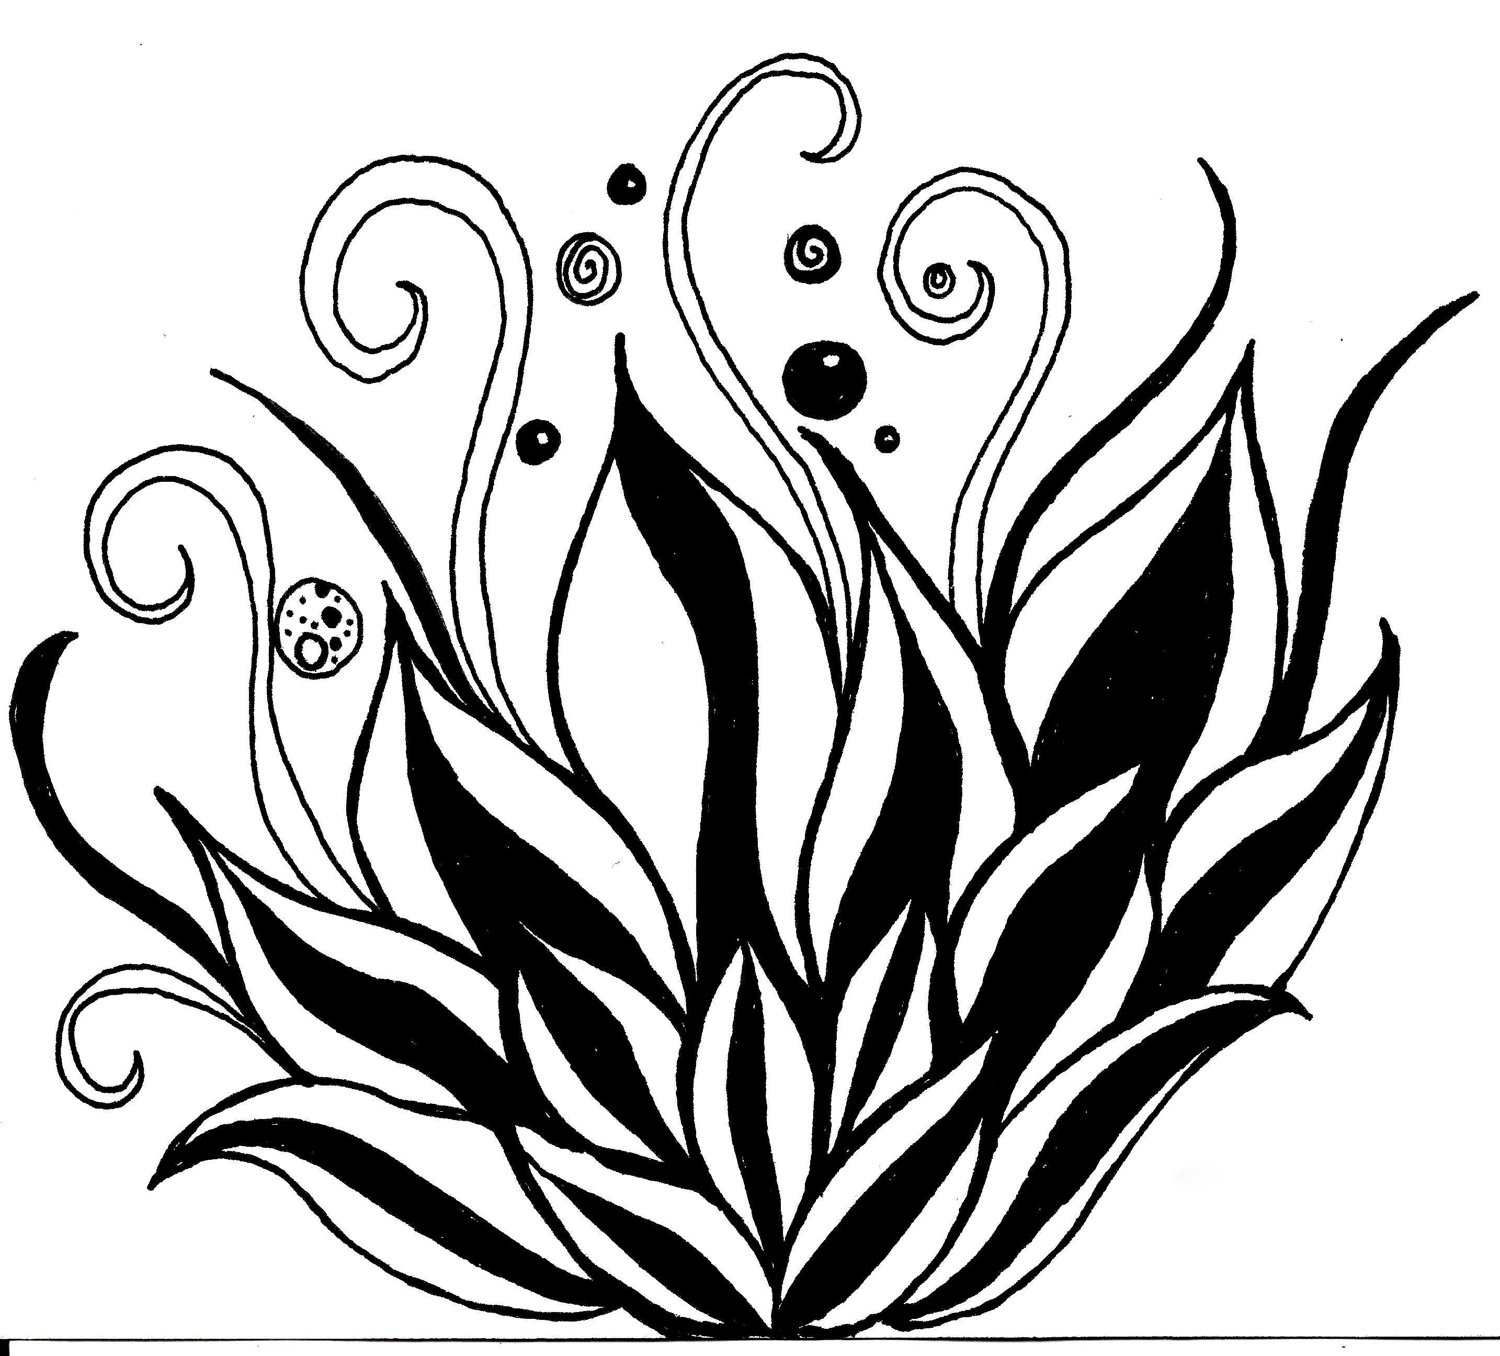 Flowers For > Lotus Flower Drawing Black And White